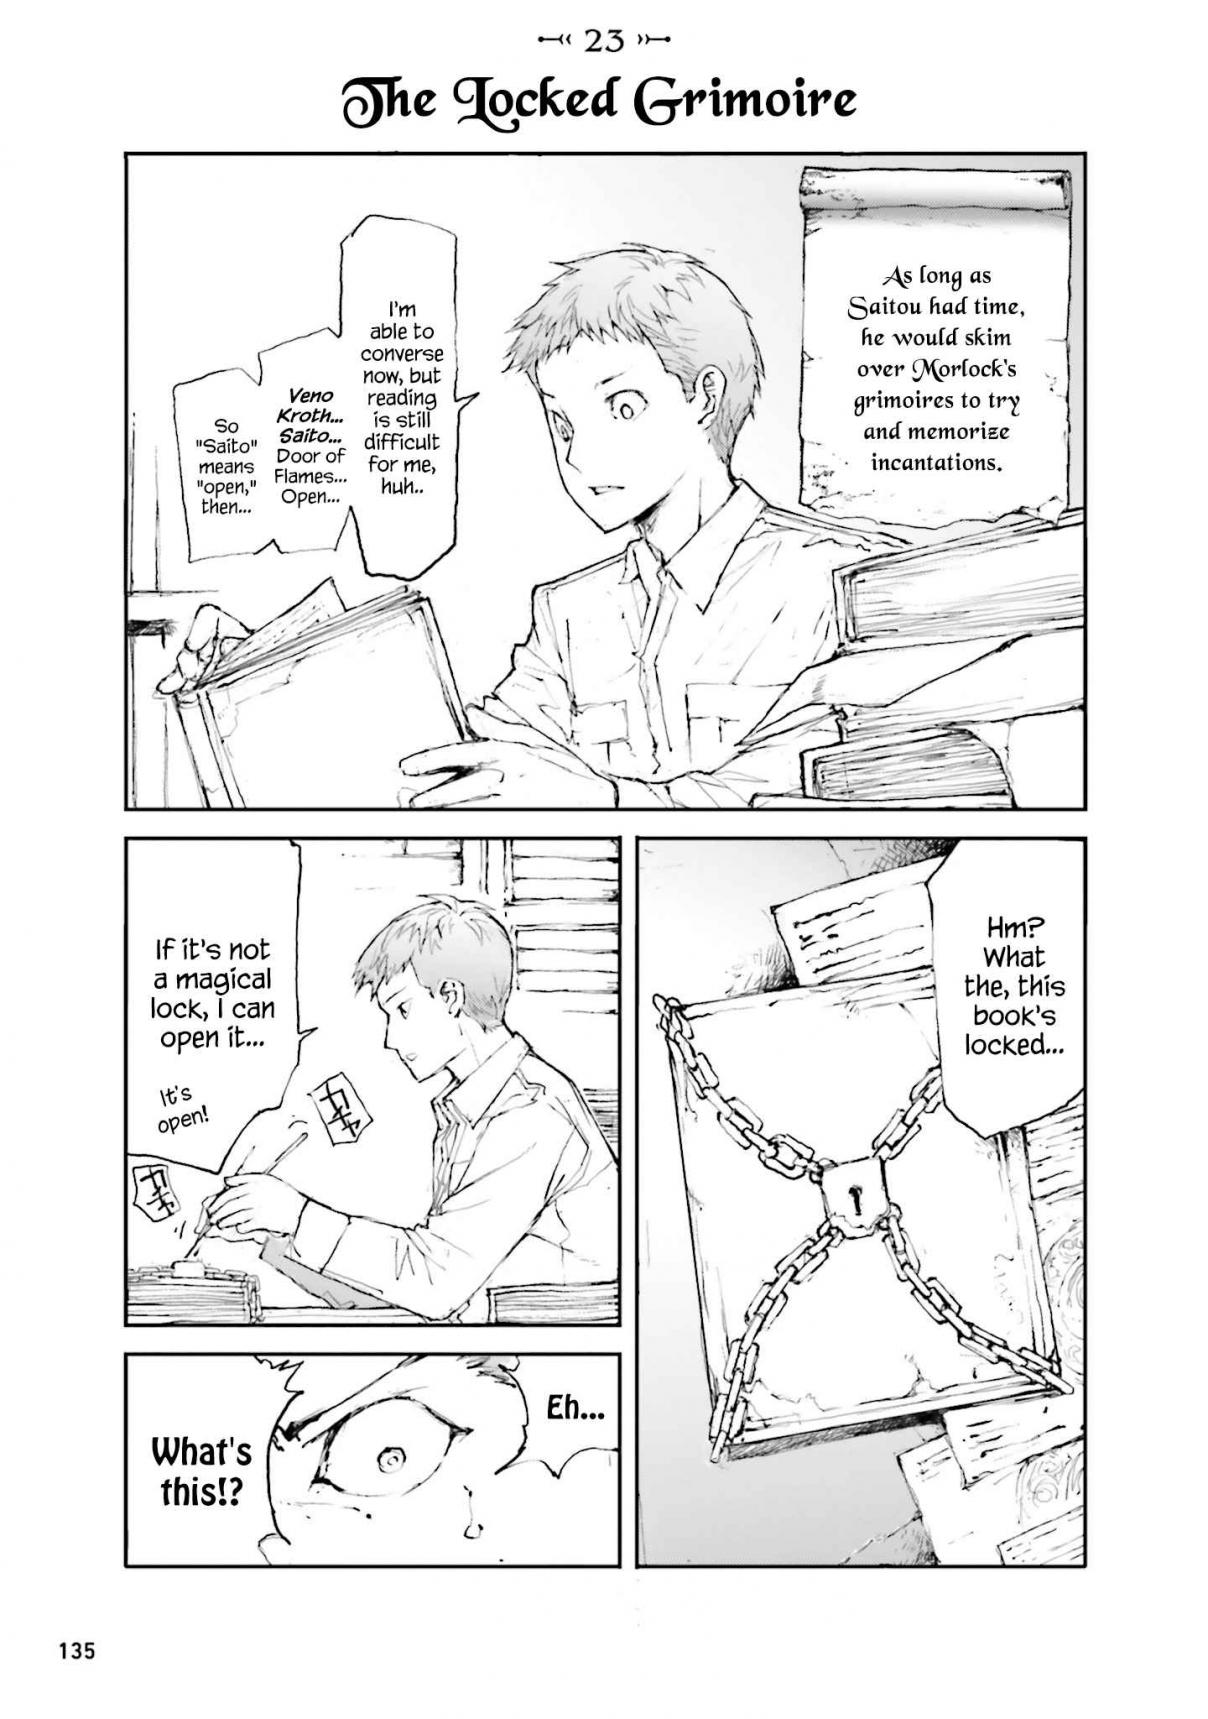 Handyman Saitou In Another World Ch. 23 The Locked Grimoire